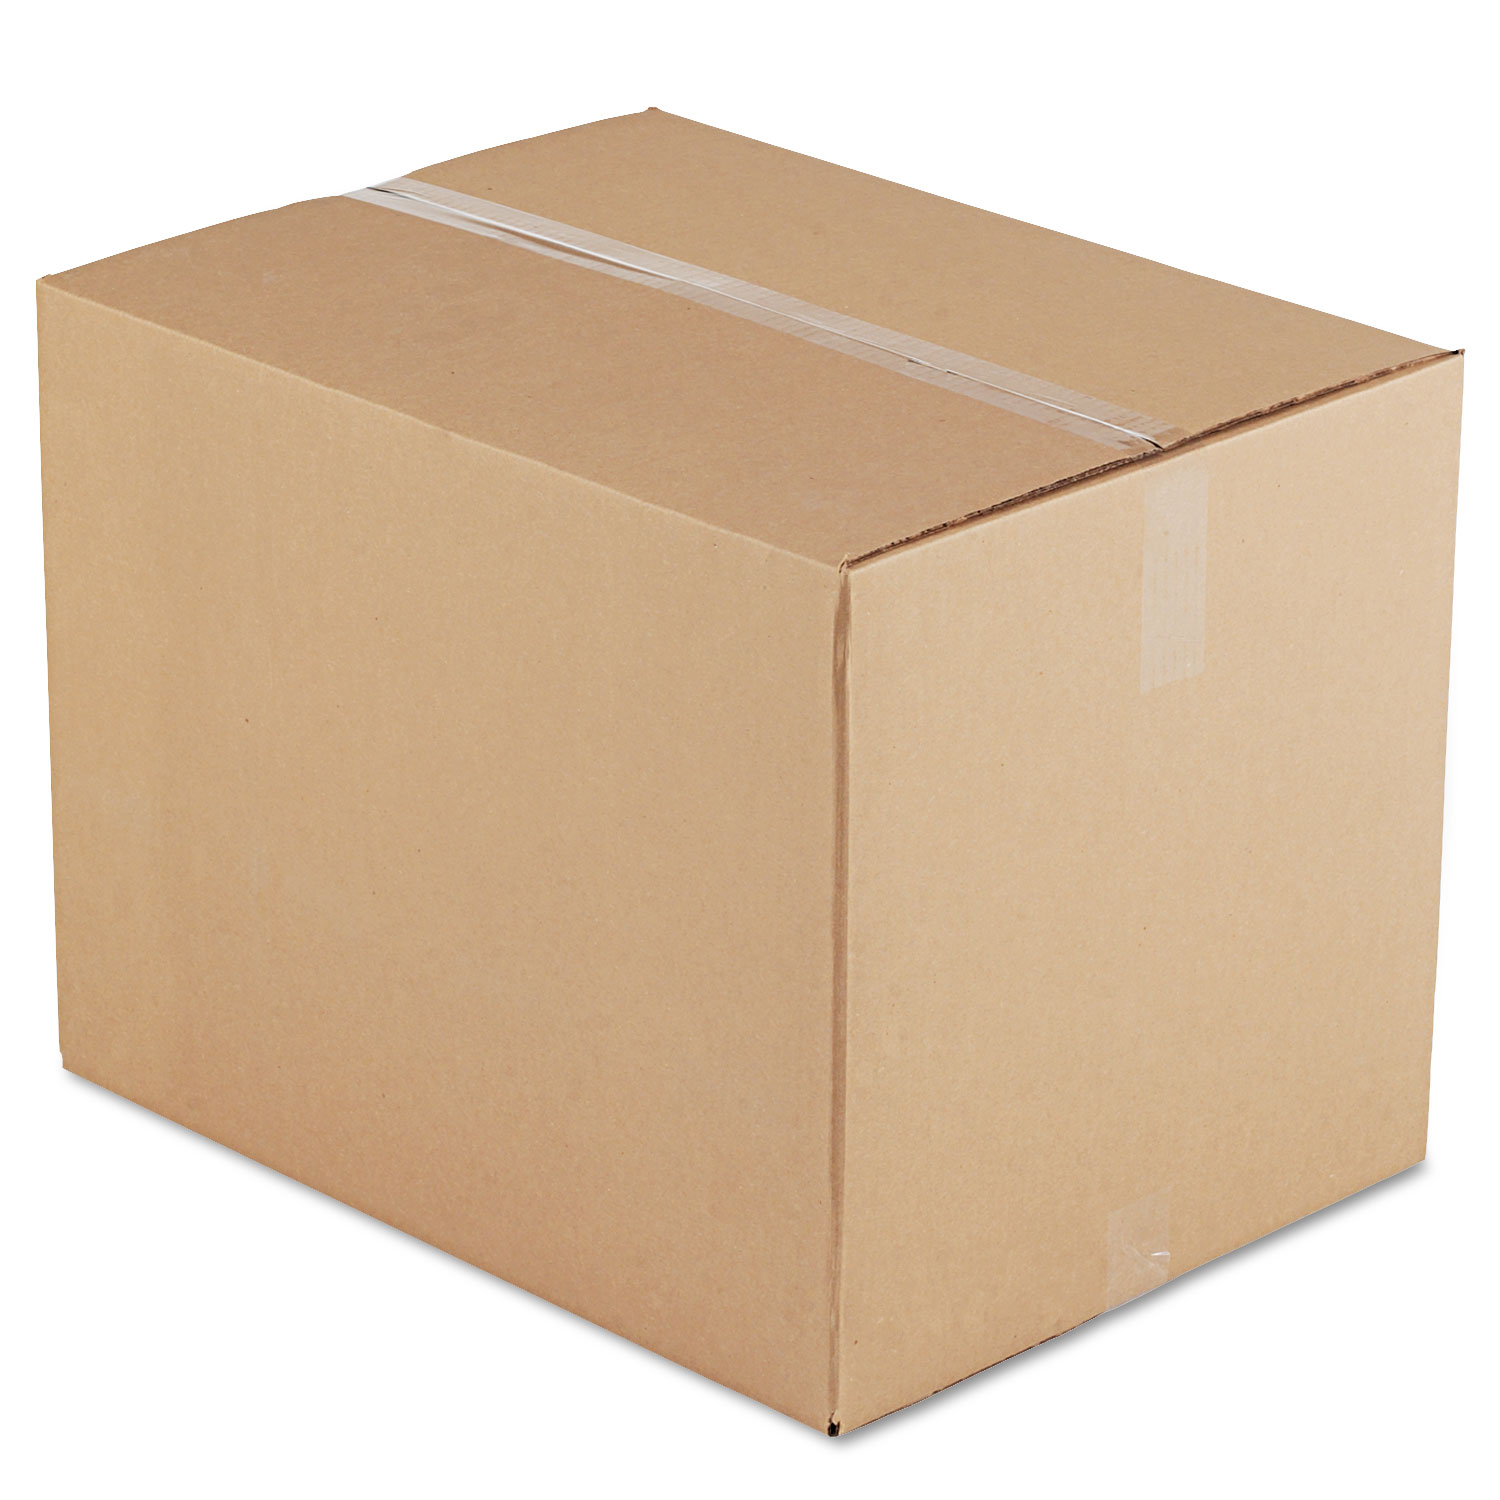 Fixed-Depth Shipping Boxes, Regular Slotted Container (RSC), 24